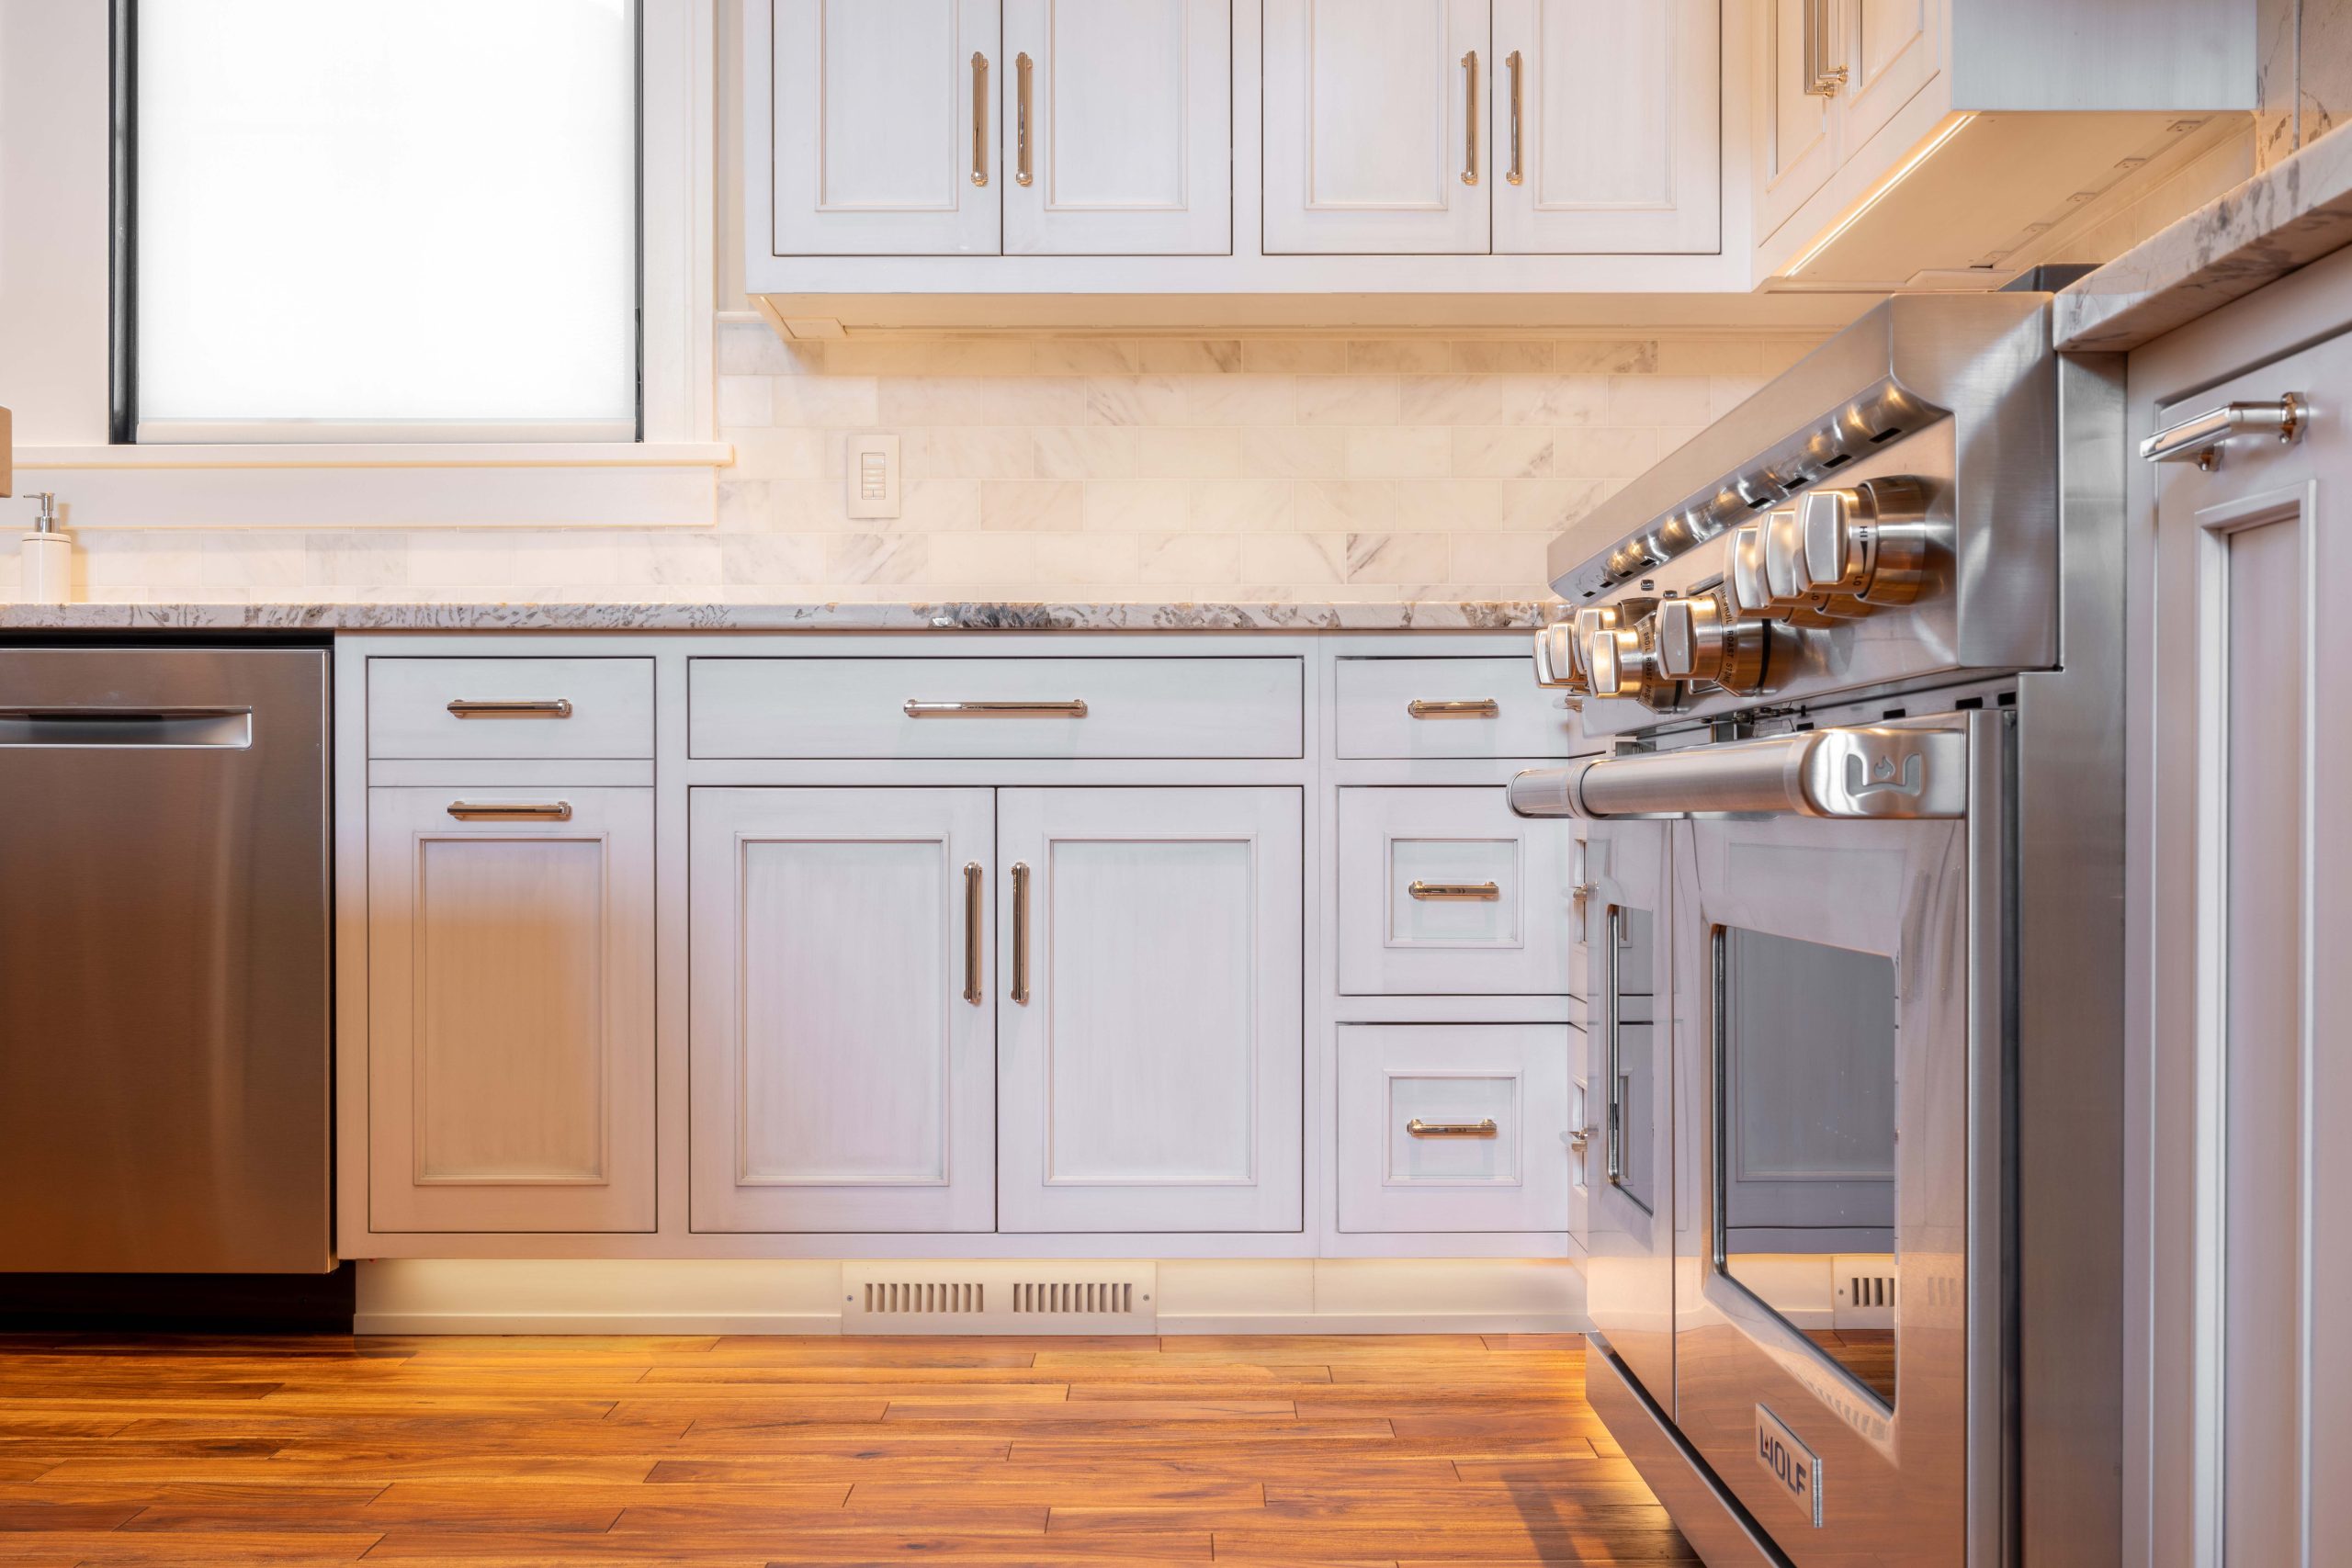 Low shot of grey inset kitchen cabinets